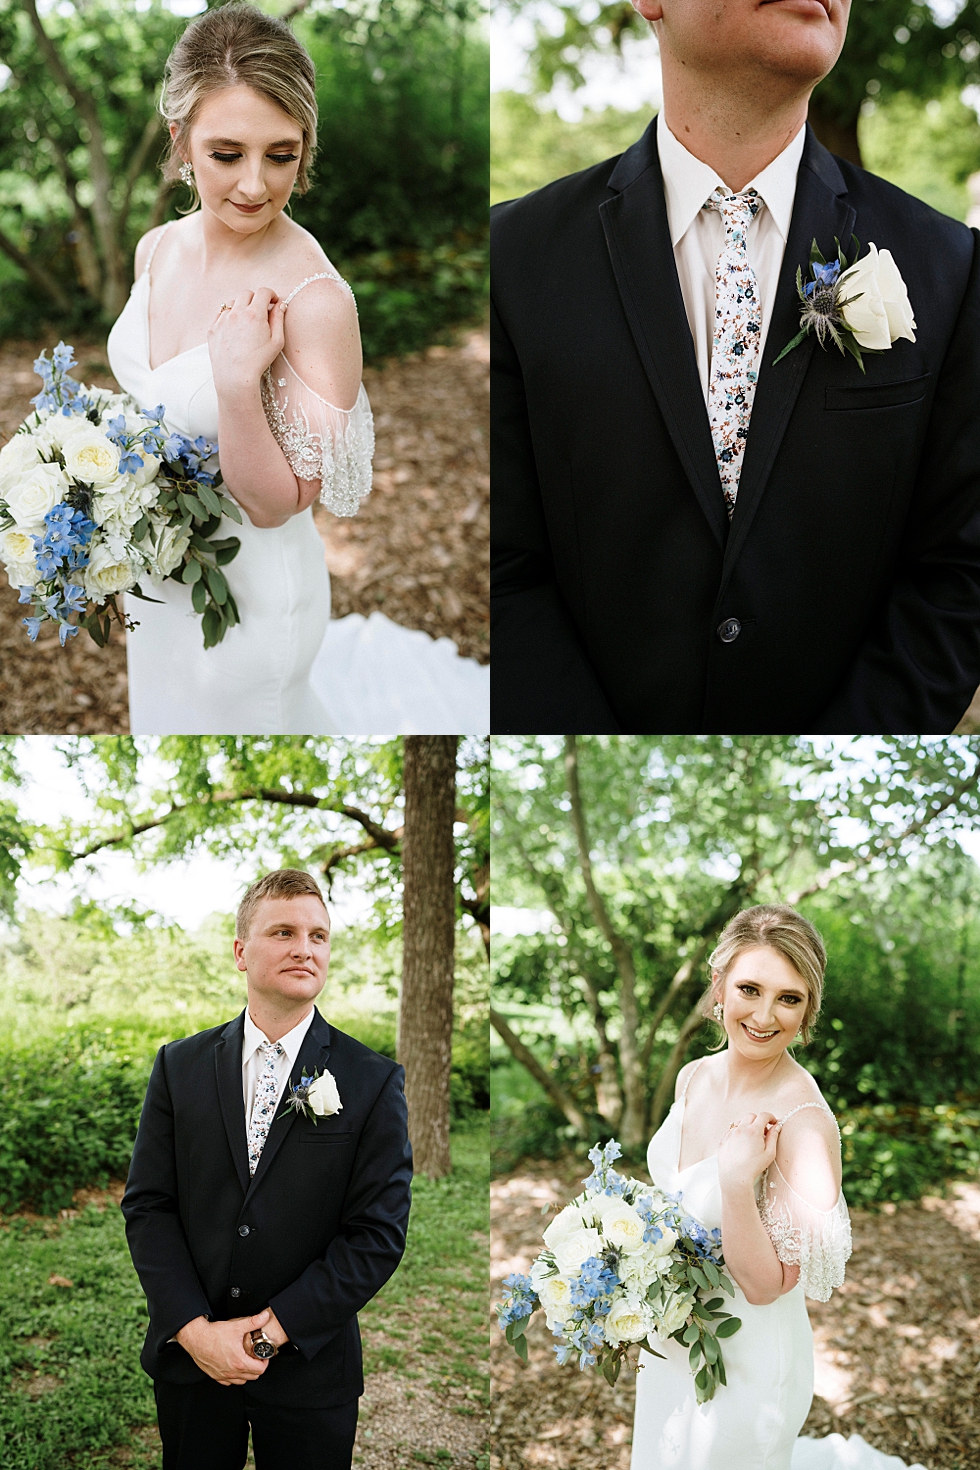  Love is in the details at this gorgeous spring wedding in Louisville Kentucky at Locust Grove. spring wedding dress Locust Grove Louisville photographer Kentucky wedding photography by Lauren outdoor wedding bouquet bride and groom black suit floral